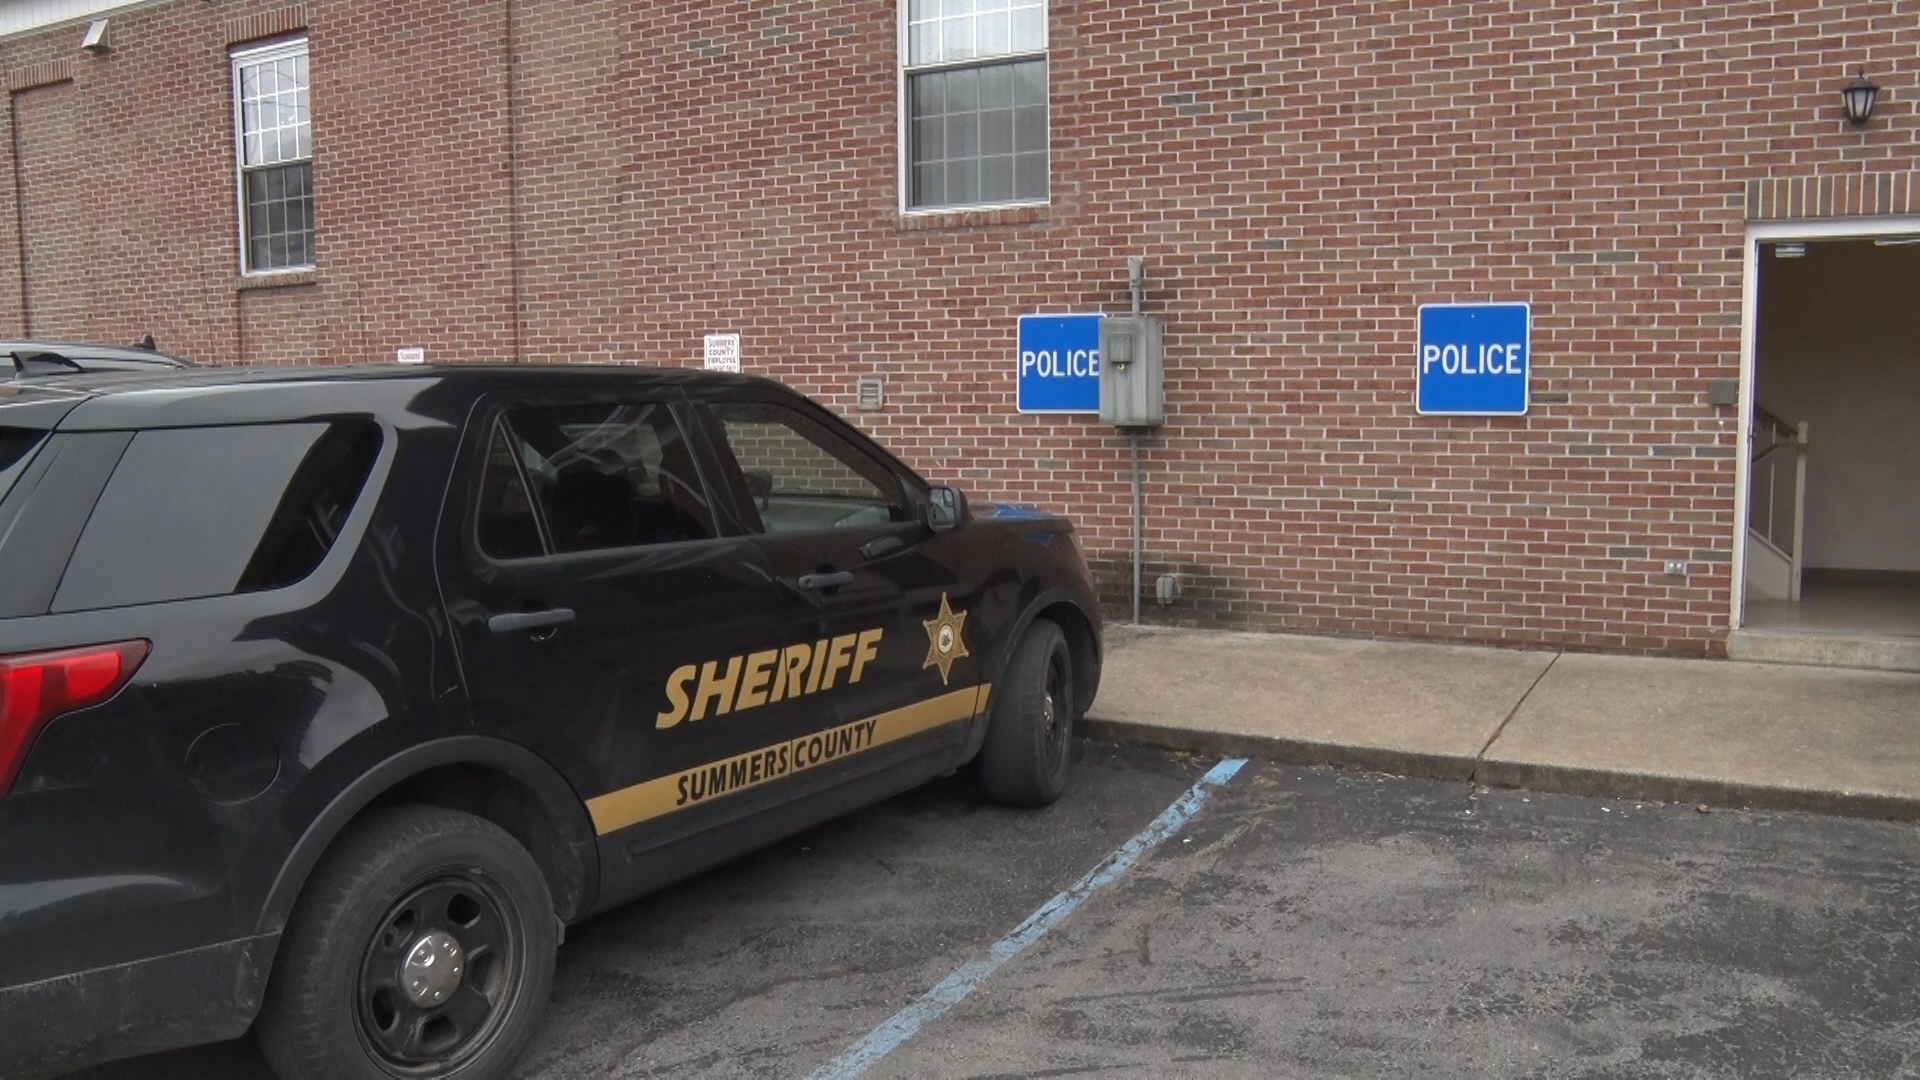 Image of Summers County Sheriff's Department